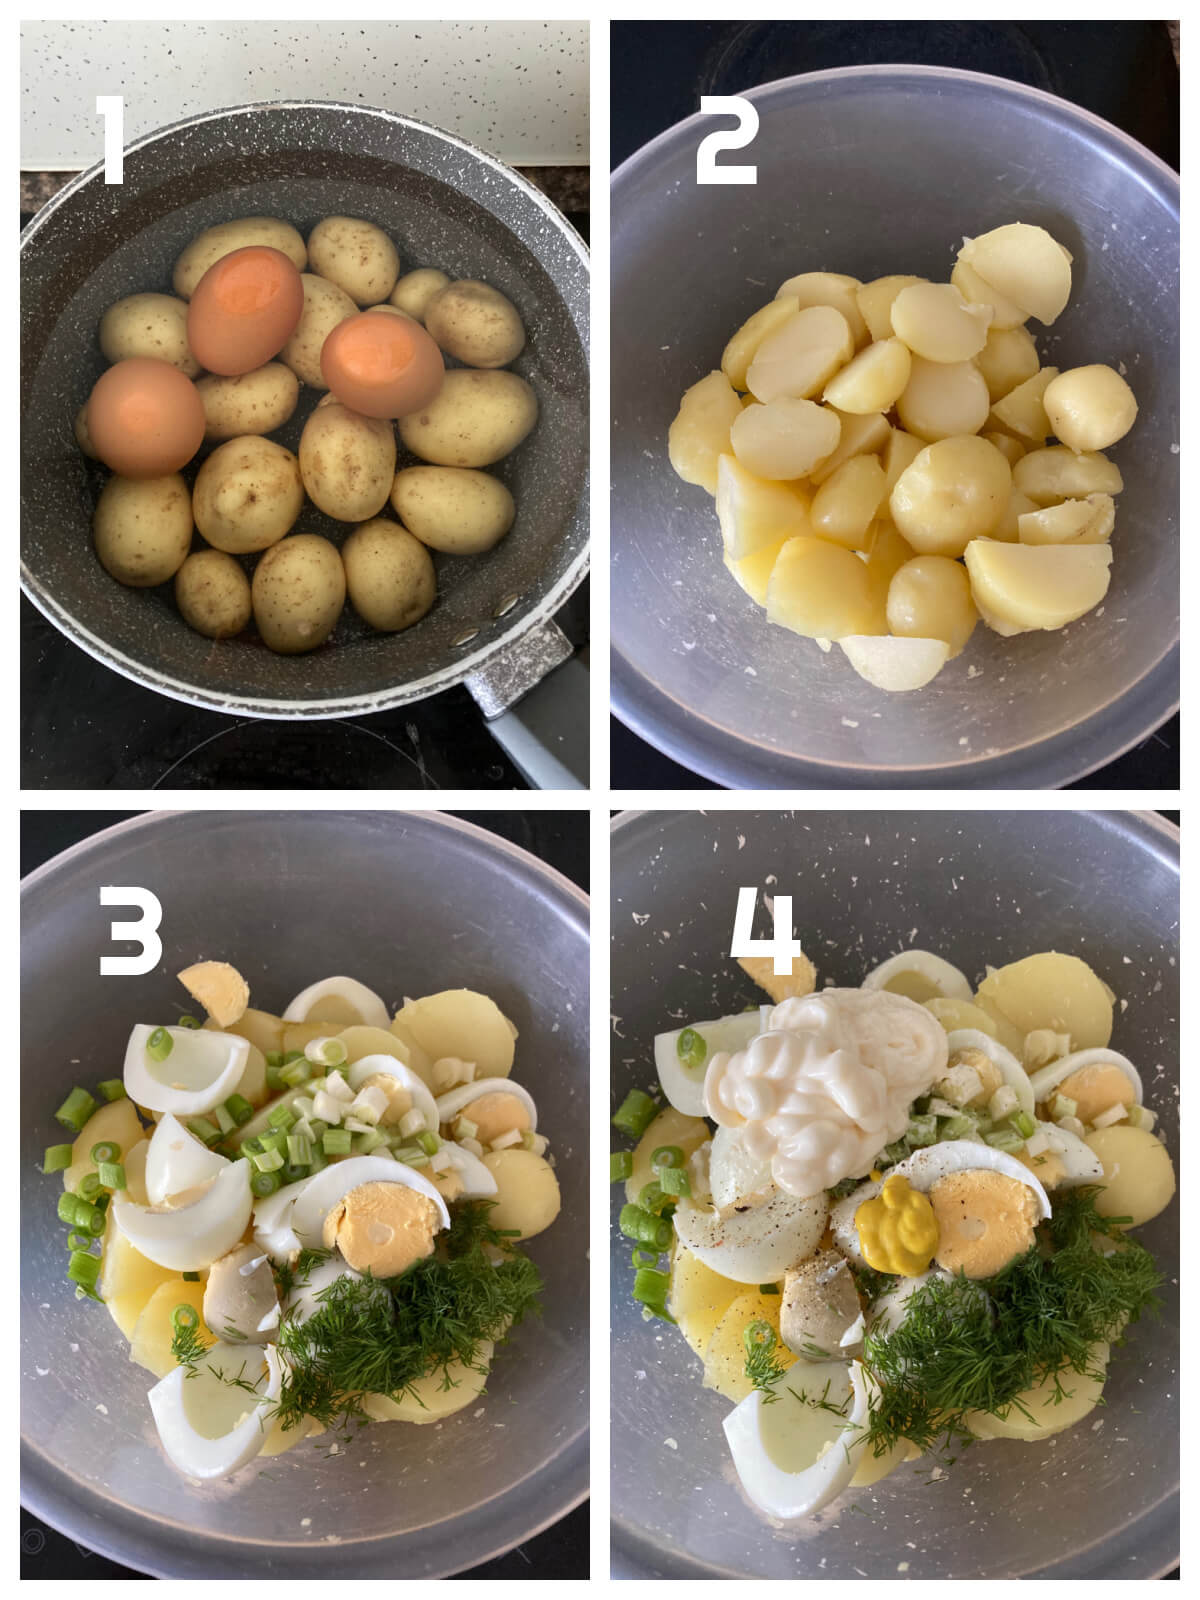 Collage of 4 photos to show how to make potato salad with eggs.